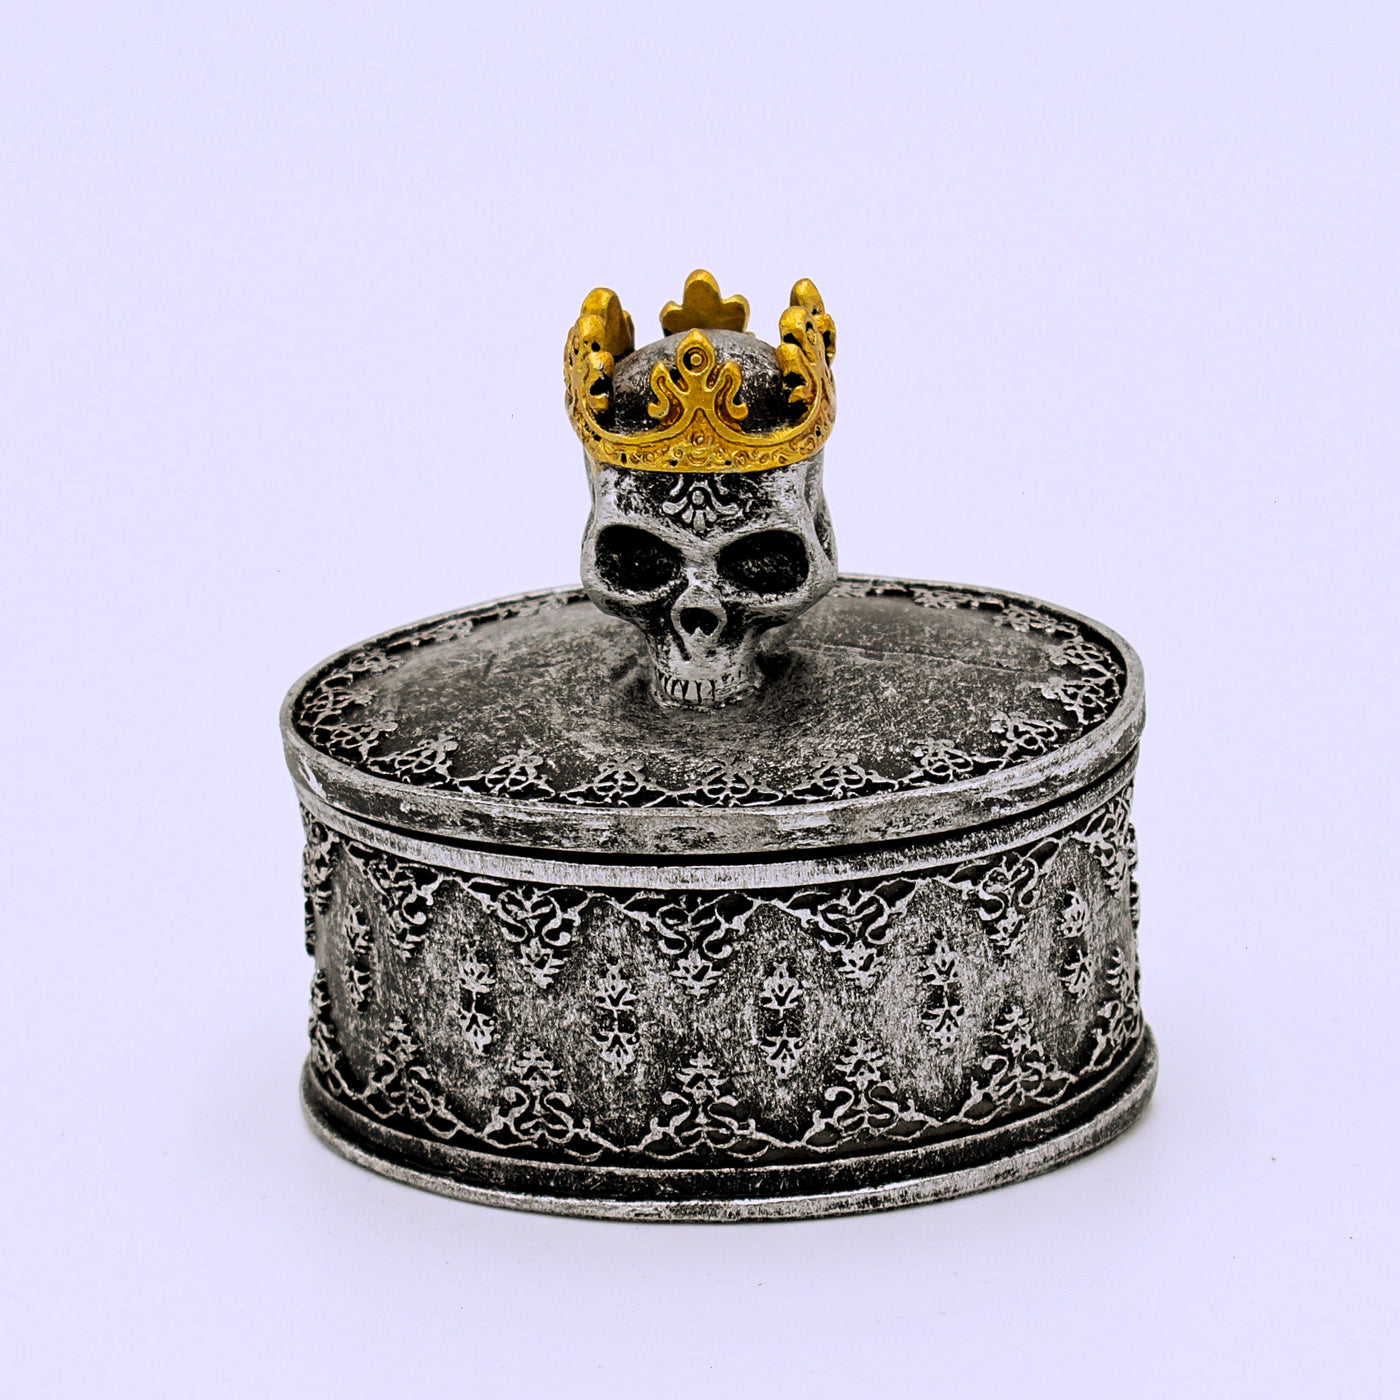 Crowned Skull Trinket Box - The Cranio Collections